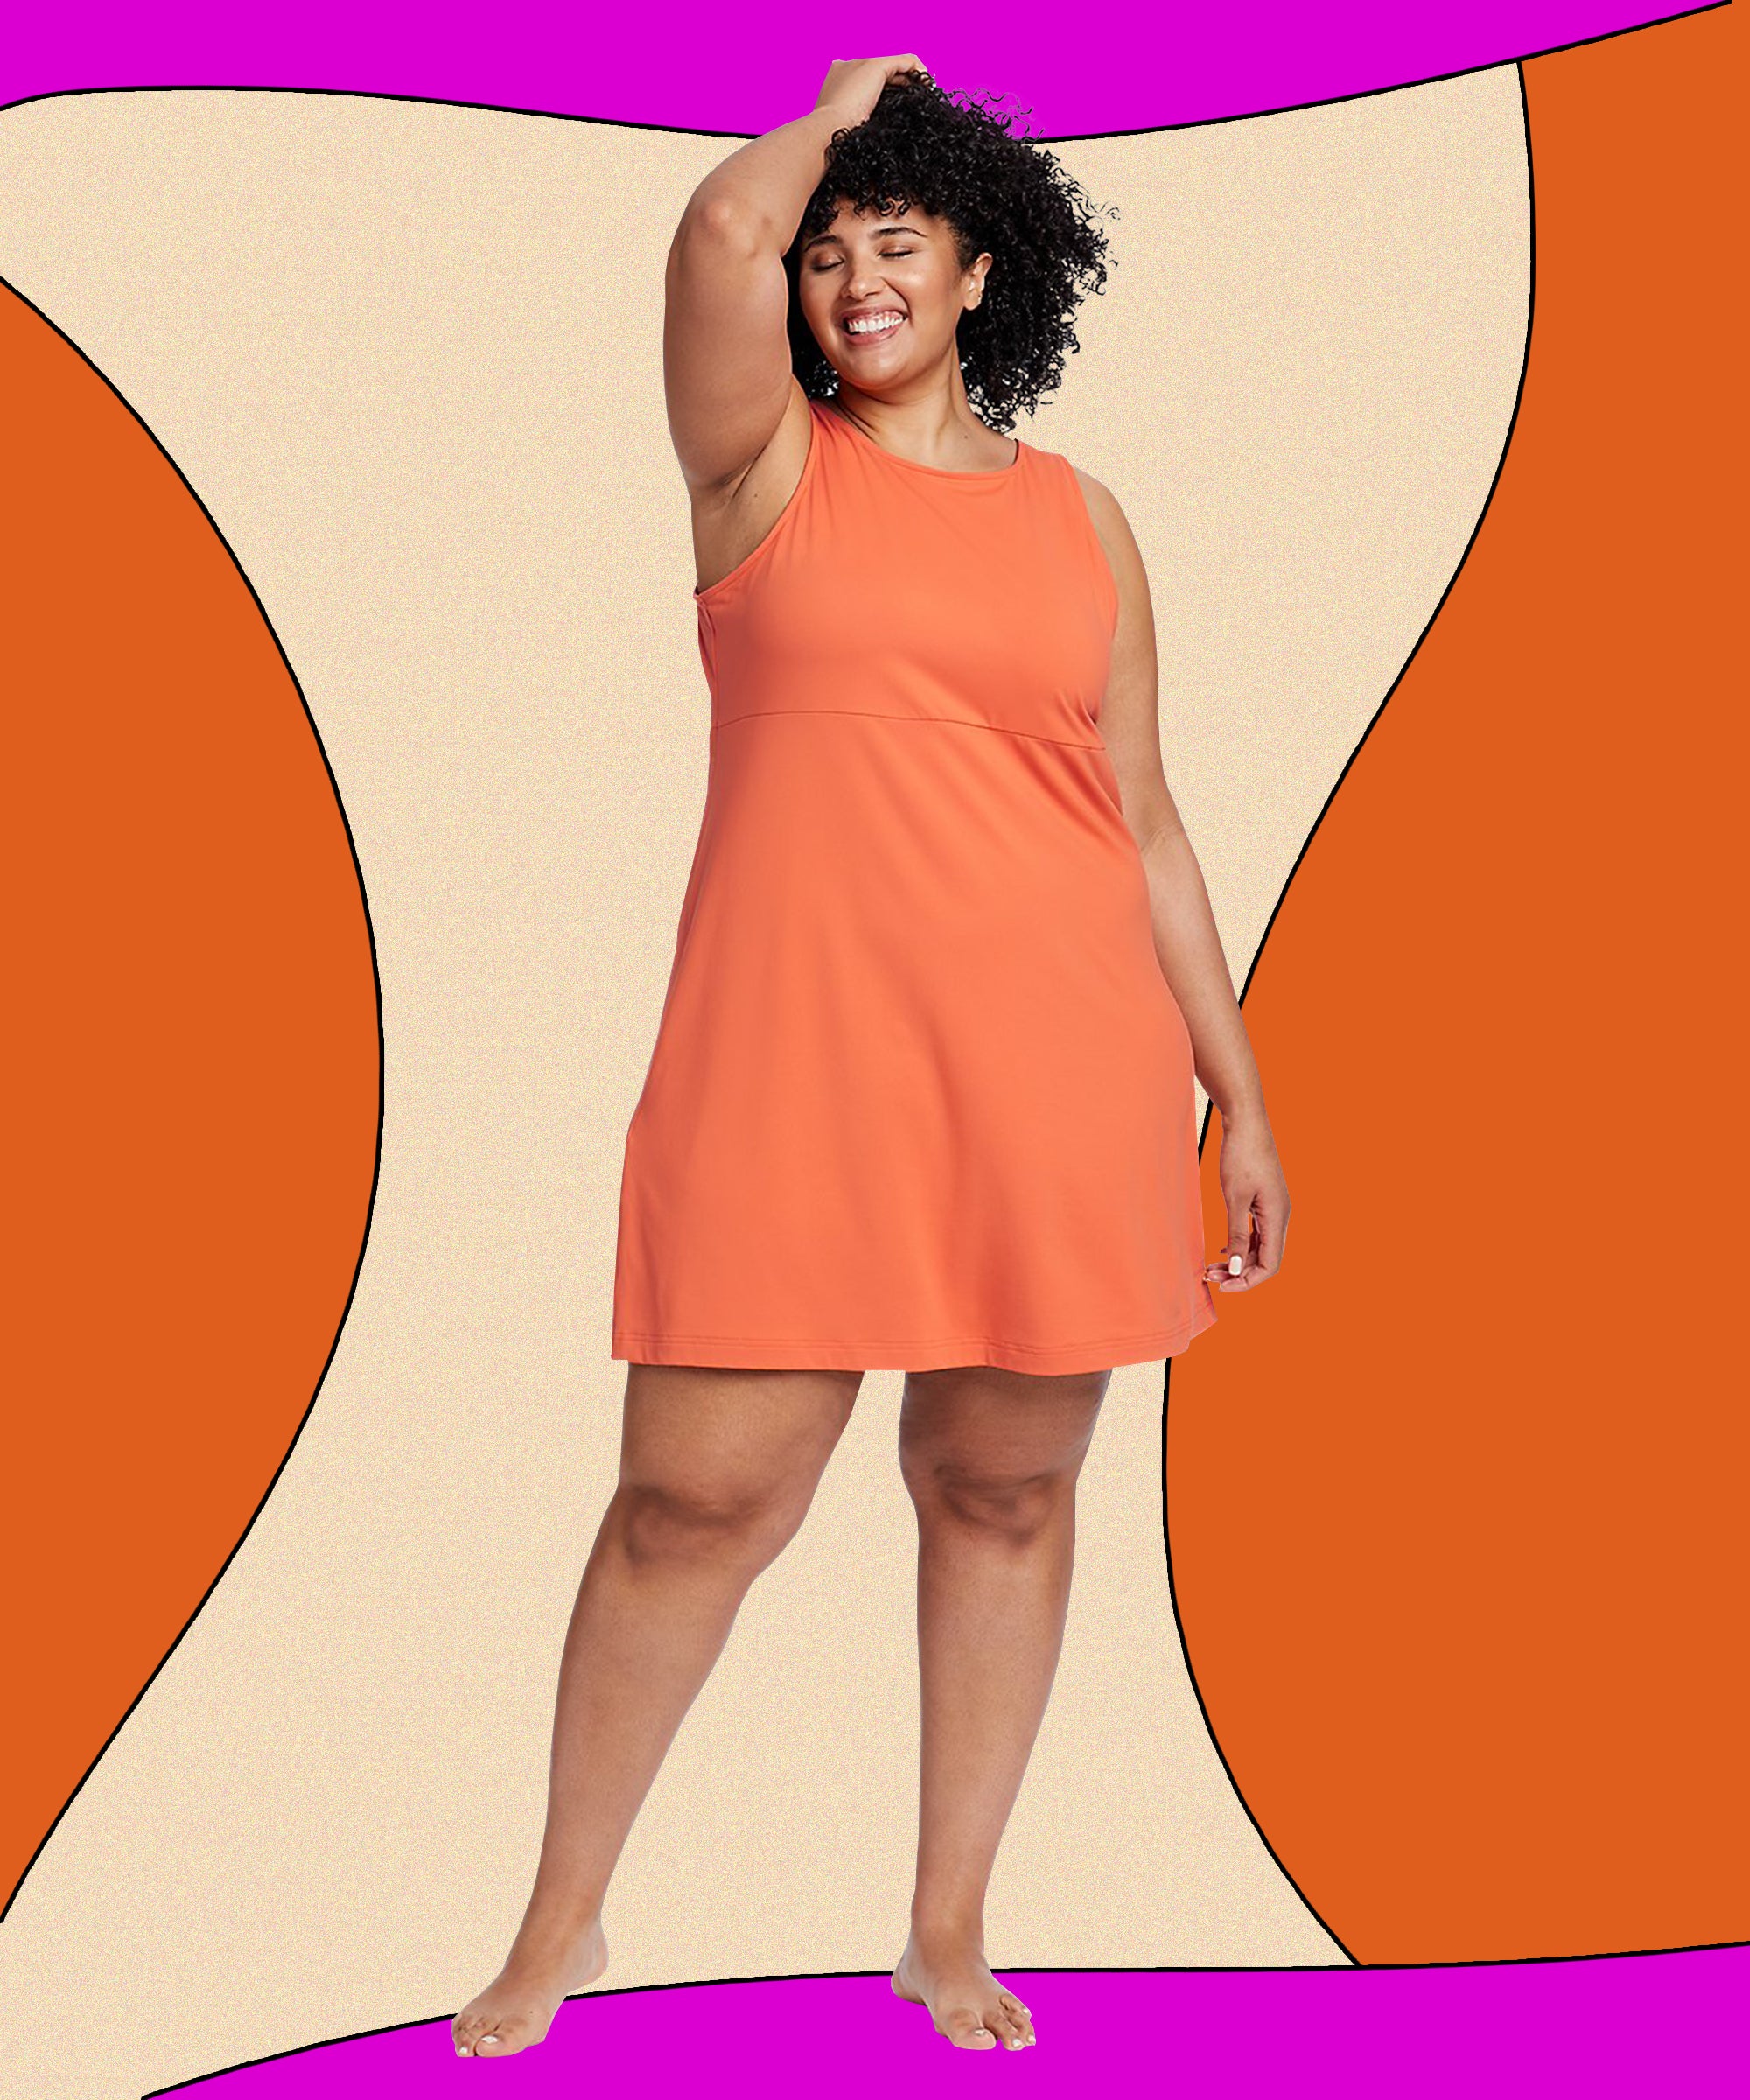 20 Plus Size Swimsuits To Shop - The Fat Girls Guide 20 Plus Size Swimsuits  To Shop Fashion %